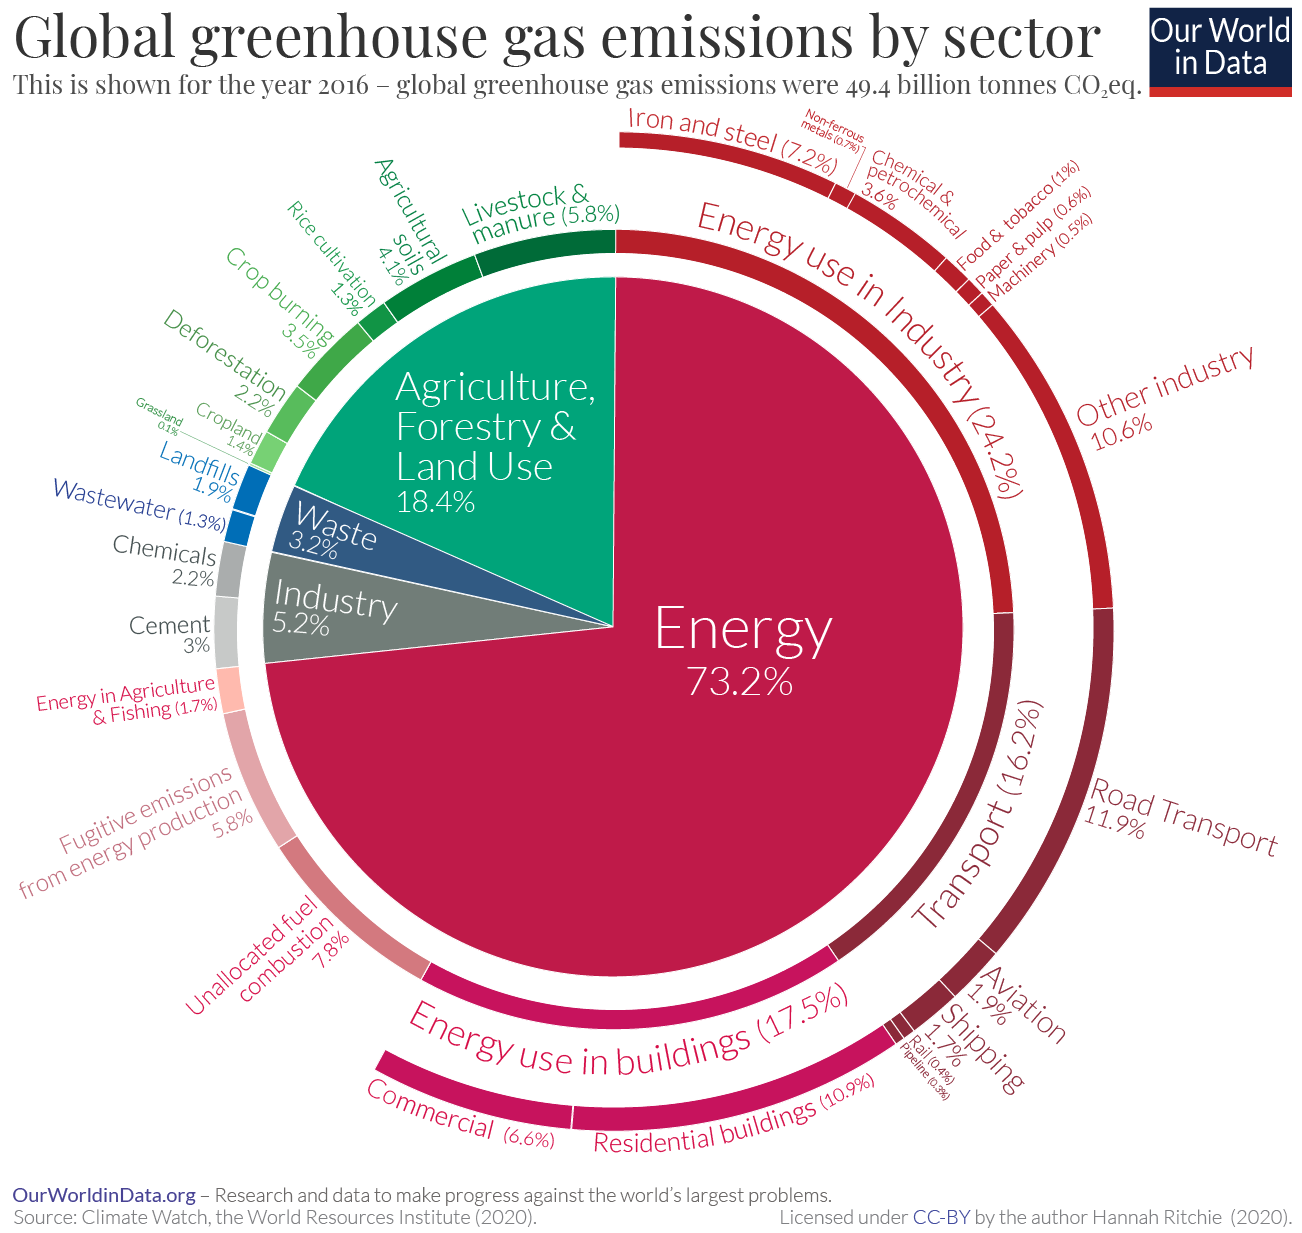 Source: Climate Watch, World Resources Institute